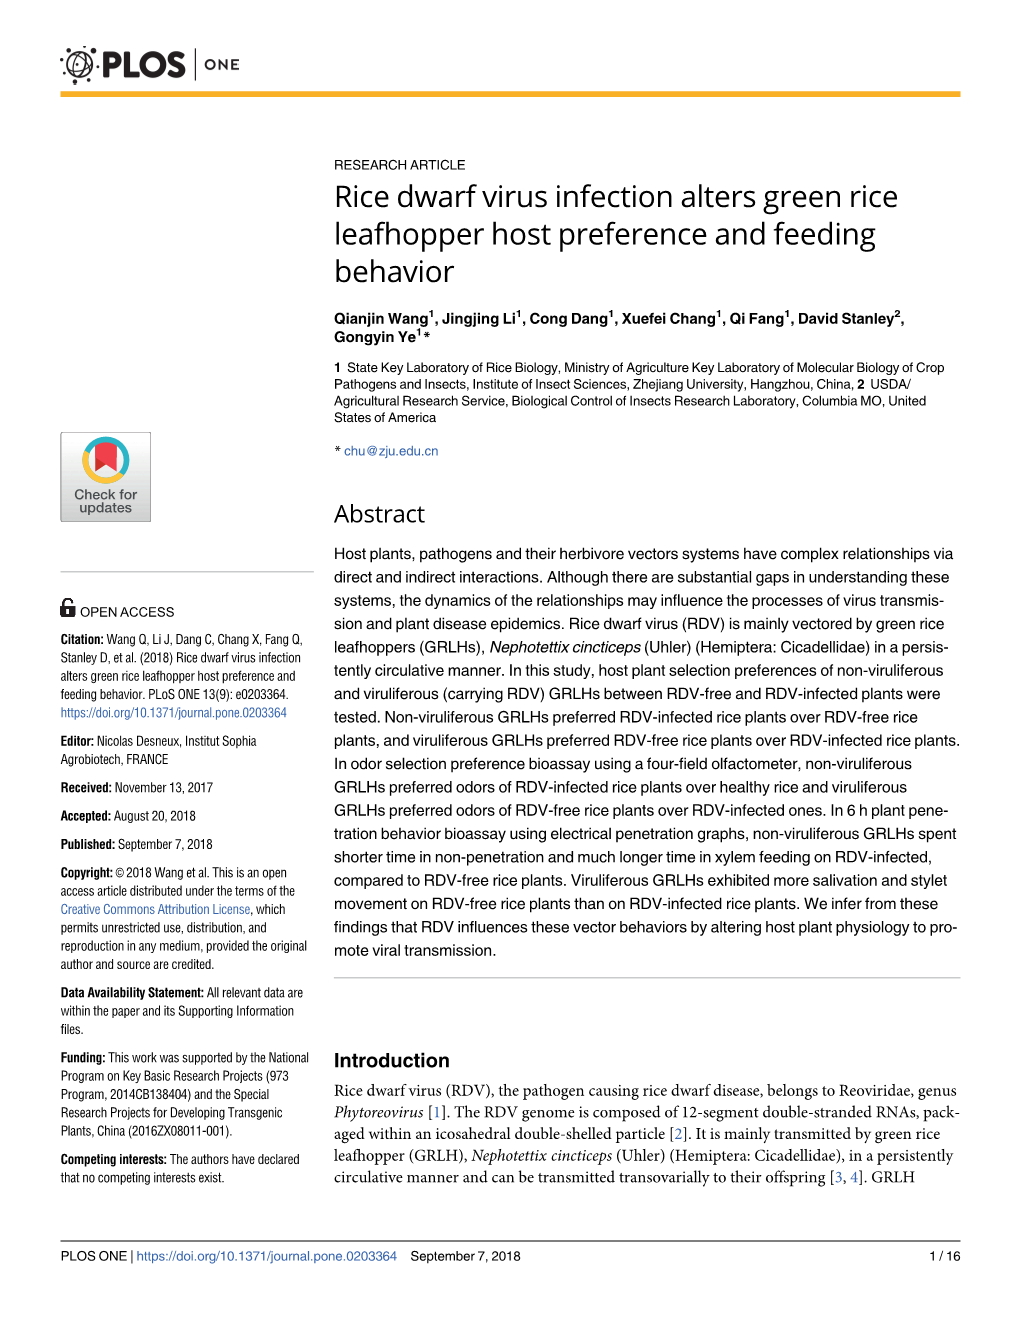 Rice Dwarf Virus Infection Alters Green Rice Leafhopper Host Preference and Feeding Behavior